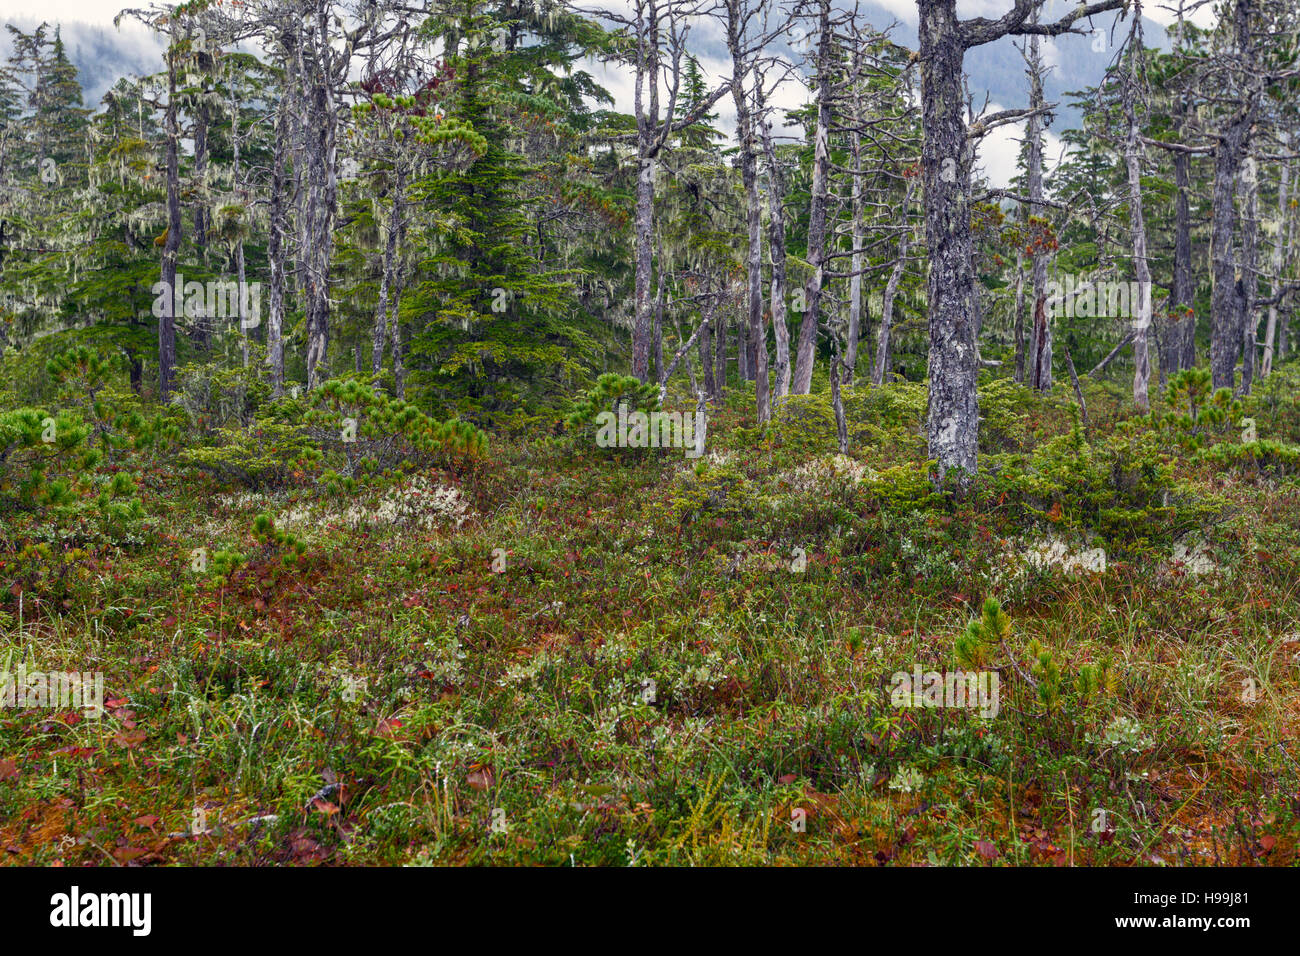 Low growing shrubs and small stands of stunted trees adorned with arboreal lichens in muskeg, Tongass National Forest, Alaska Stock Photo